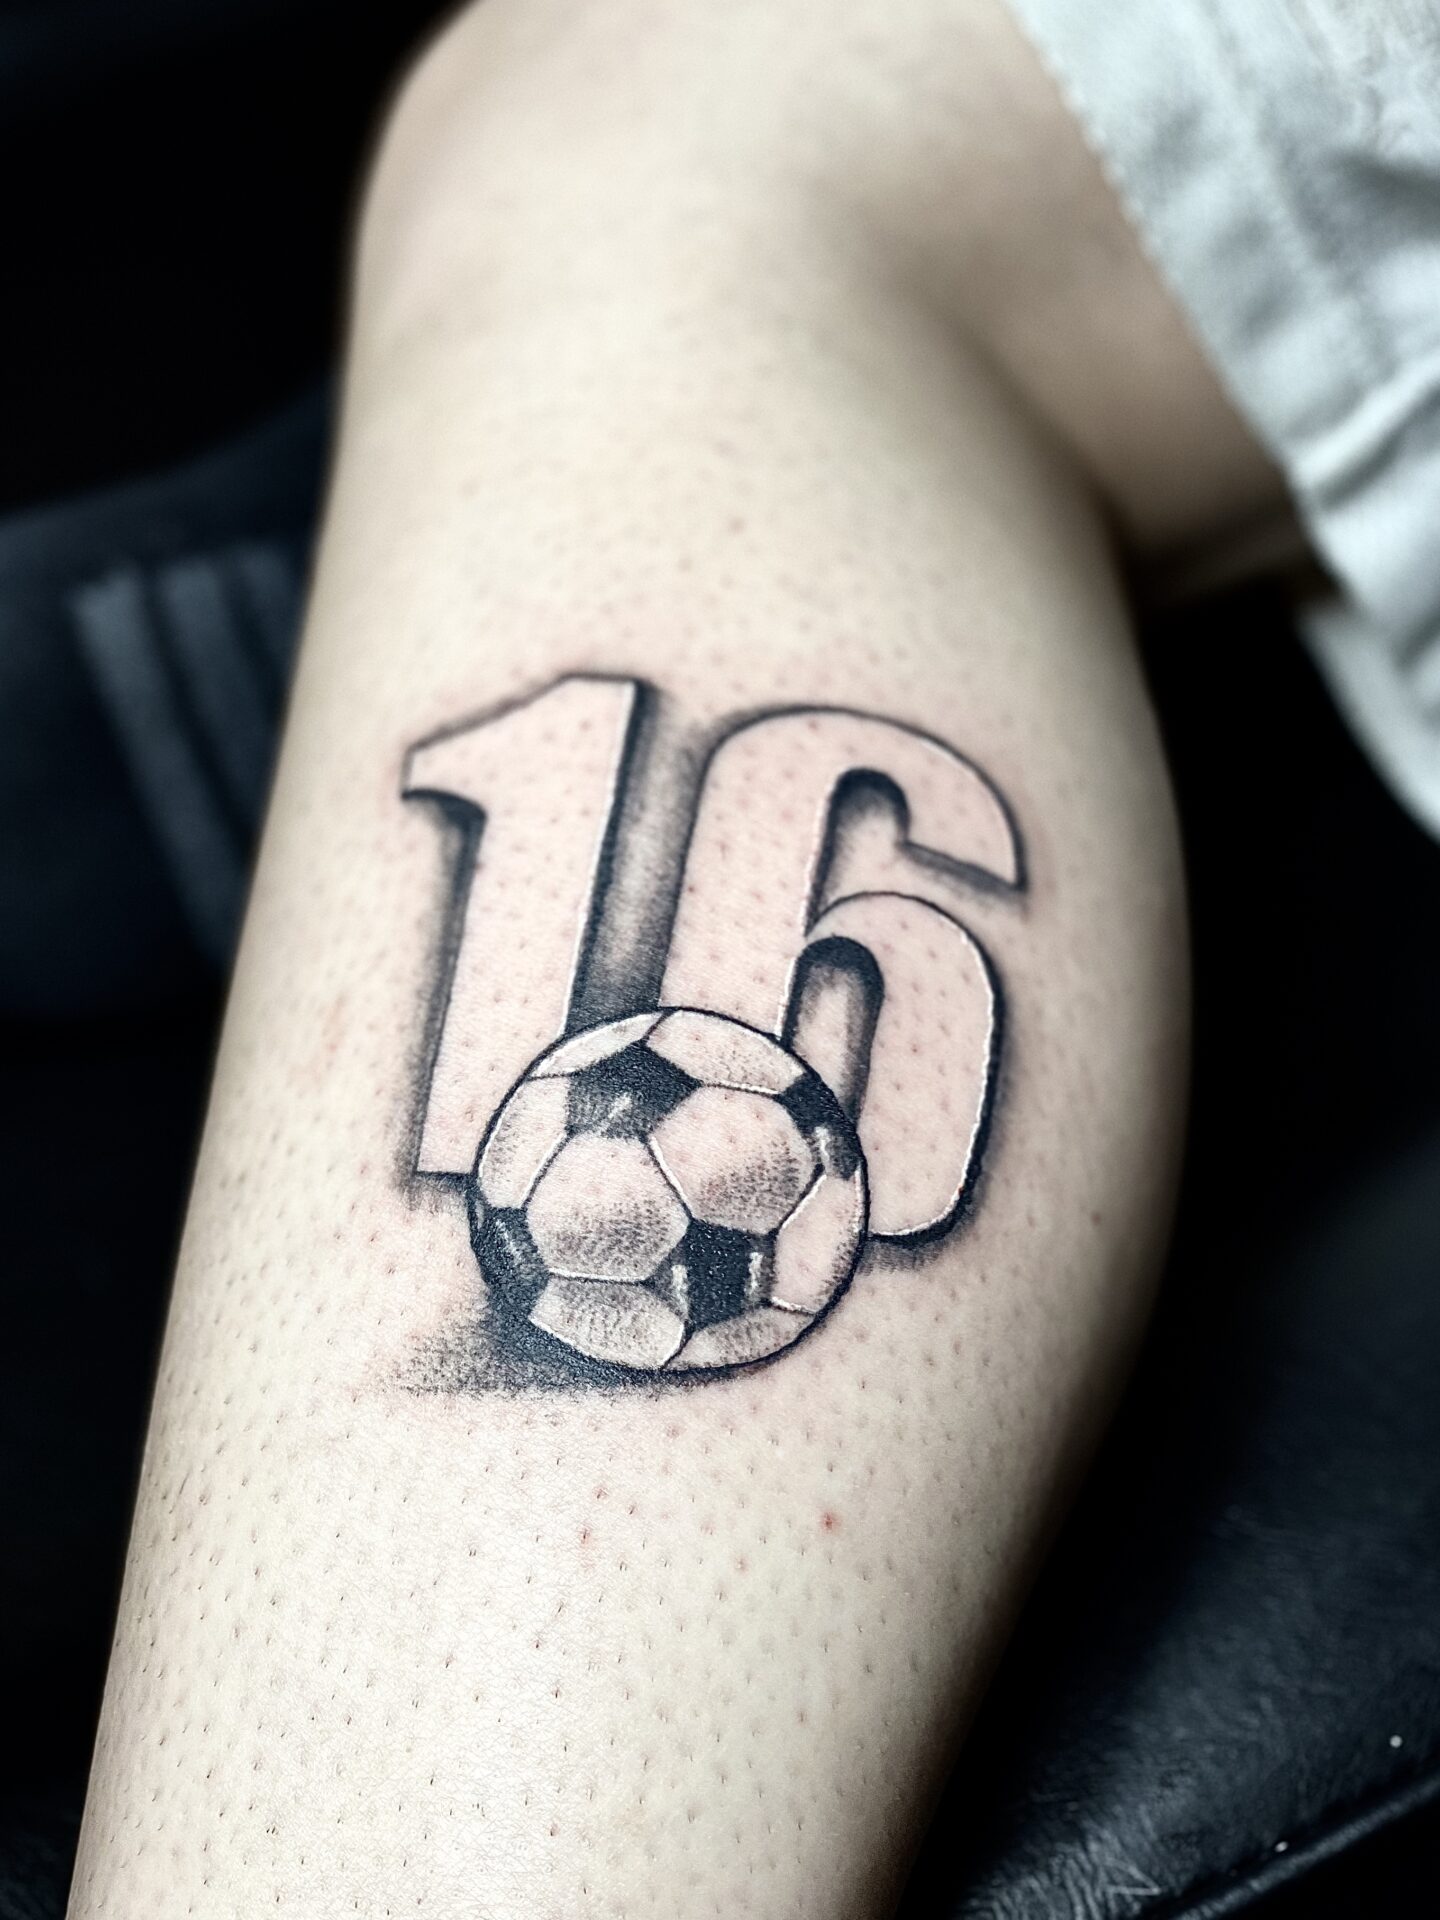 A tattoo of a soccer ball with the number 1 6 on it.